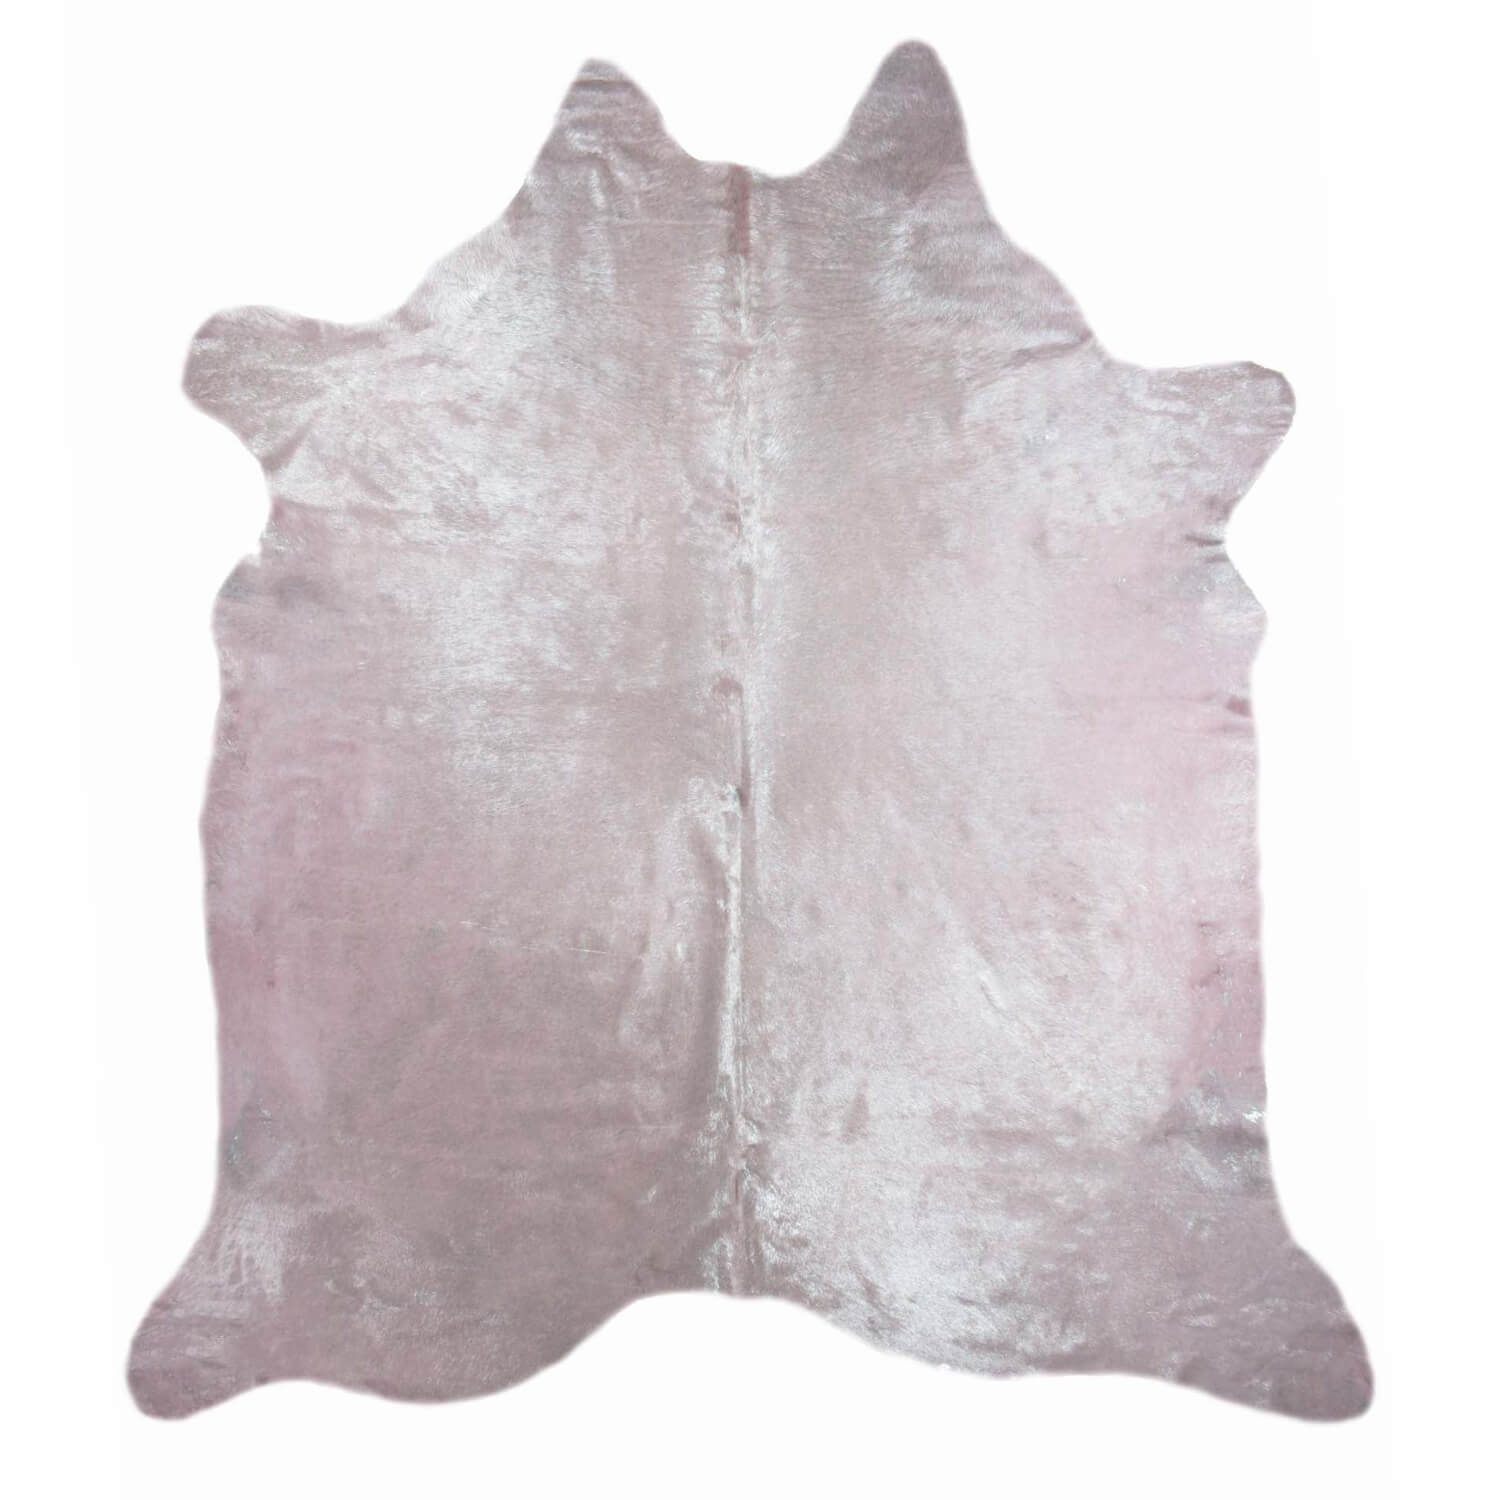 Pink with Silver Frost X-Large Brazilian Cowhide Rug 6'0H x 7'5 W #1001PNKSF by Hudson Hides